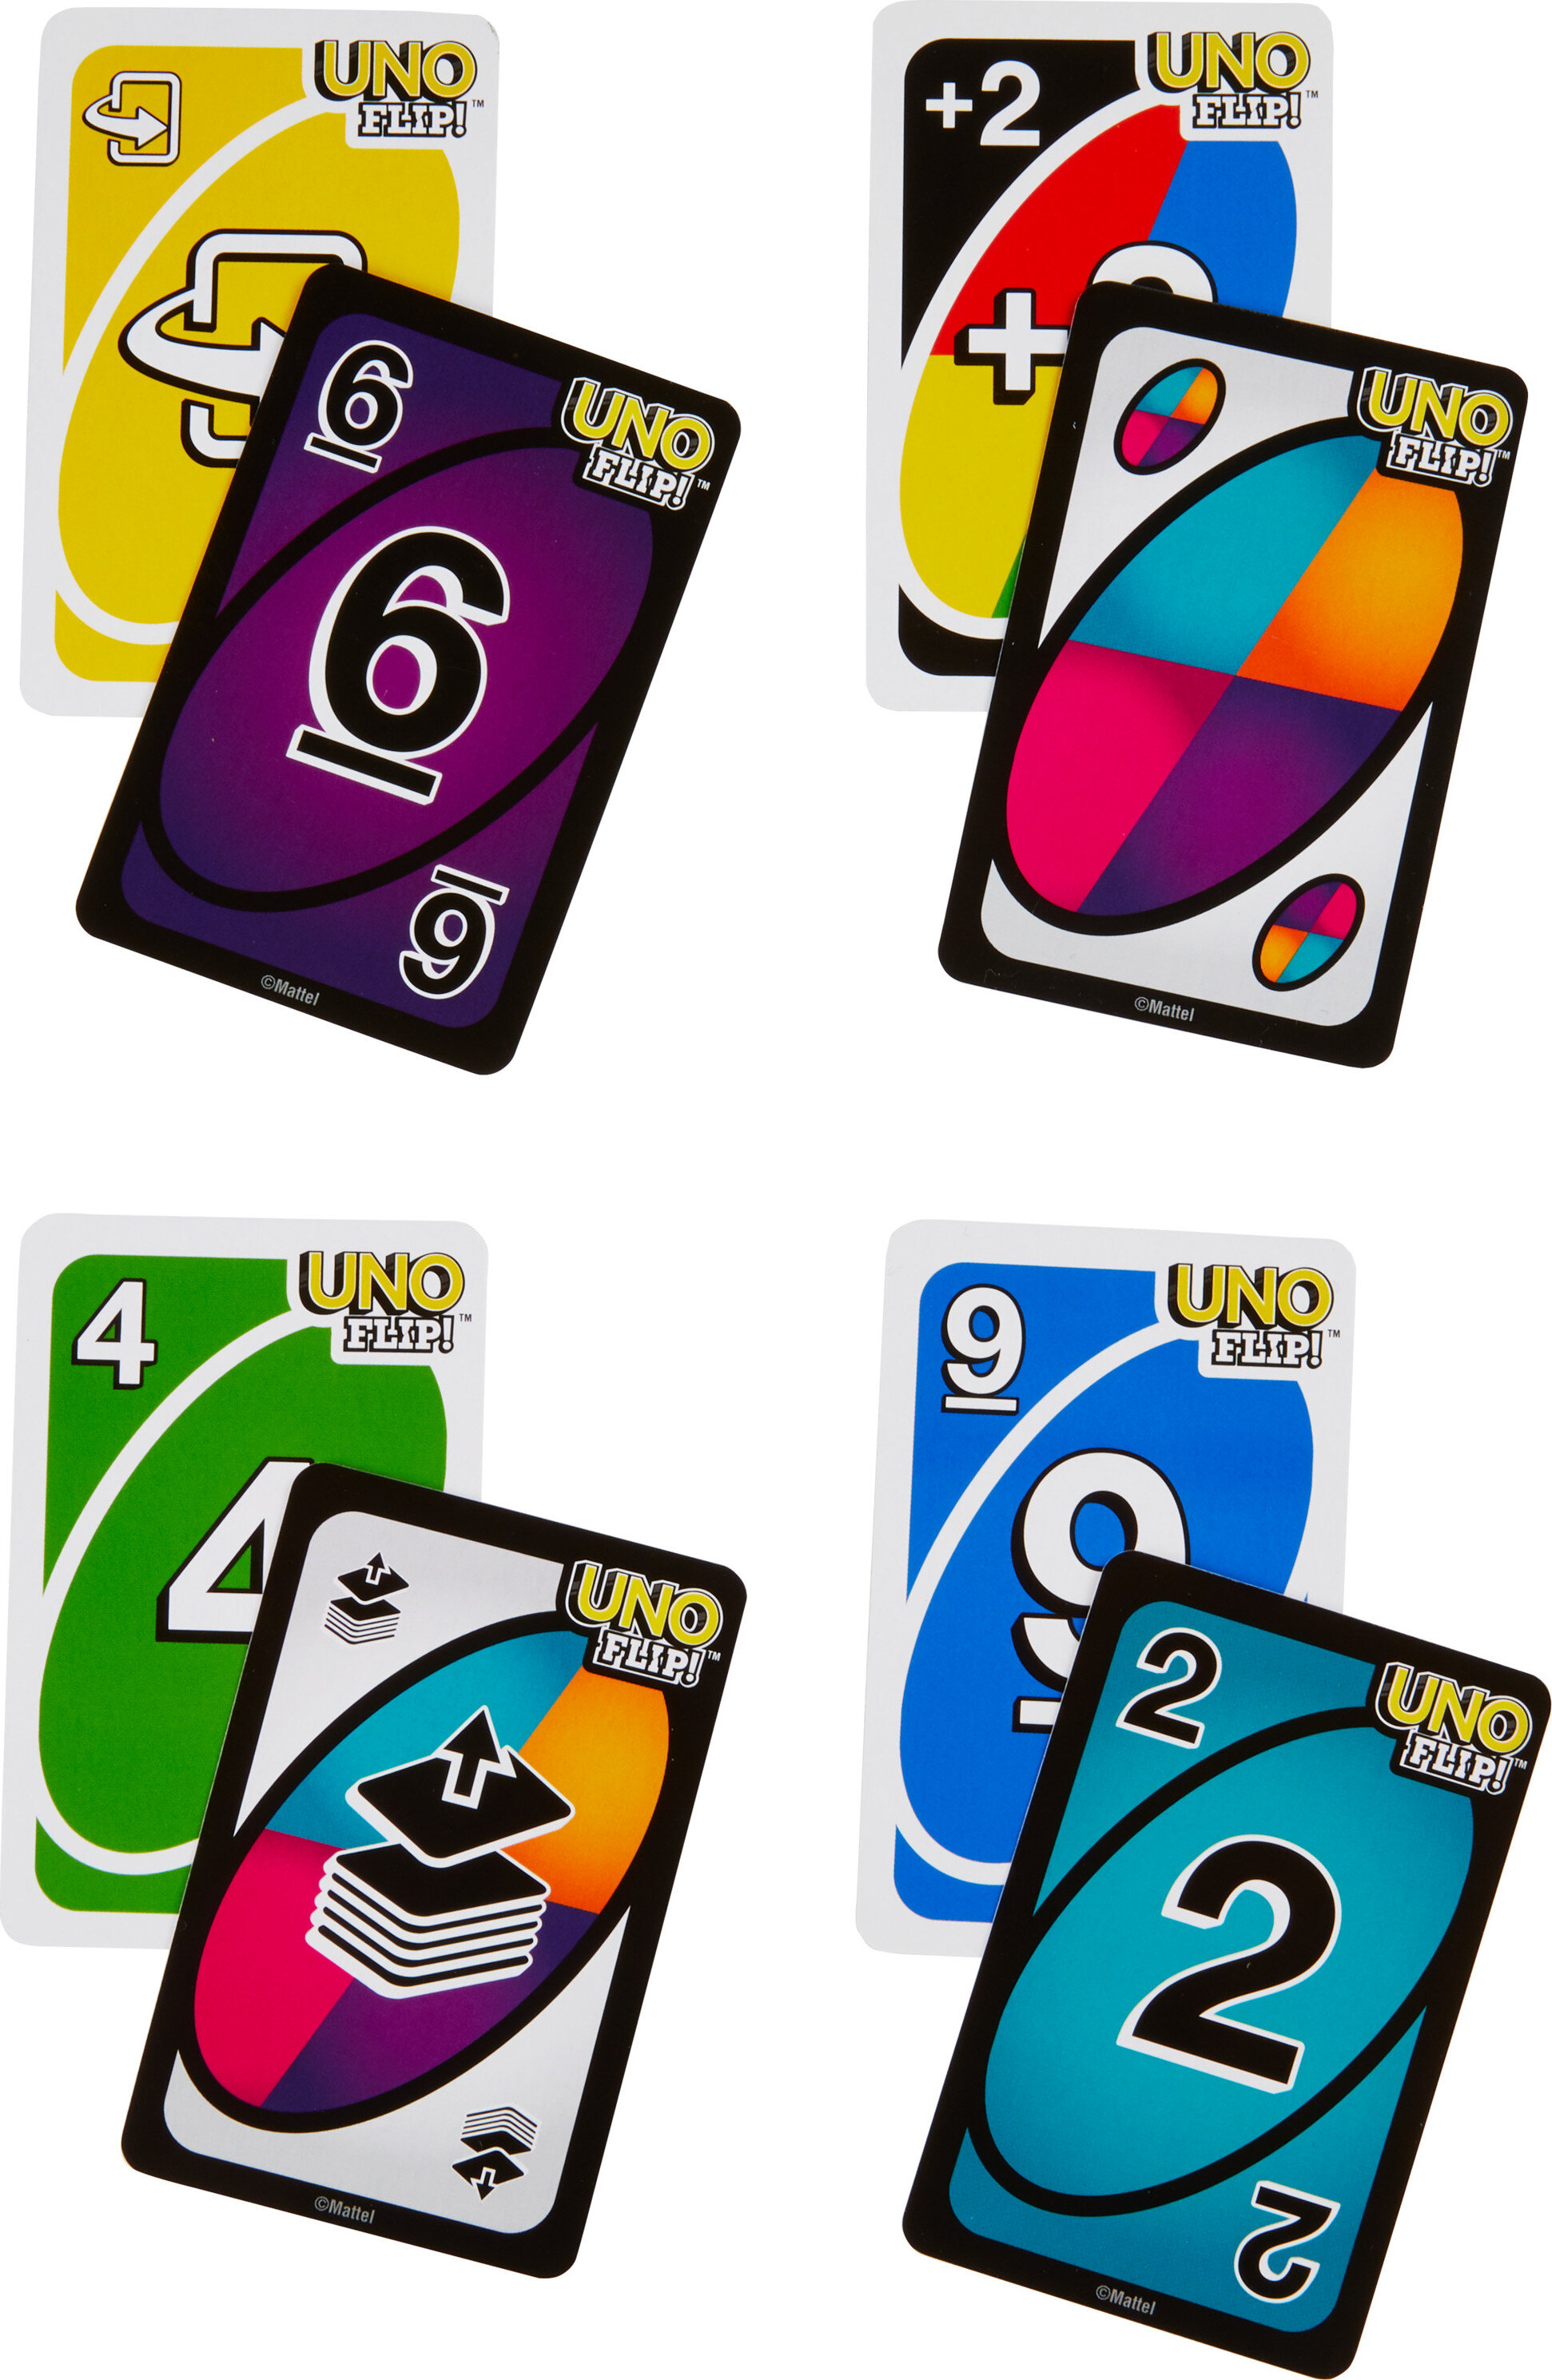 UNO Flip! Card Game for Kids, Adults & Family Night with Double-Sided Cards, Light & Dark - image 4 of 7